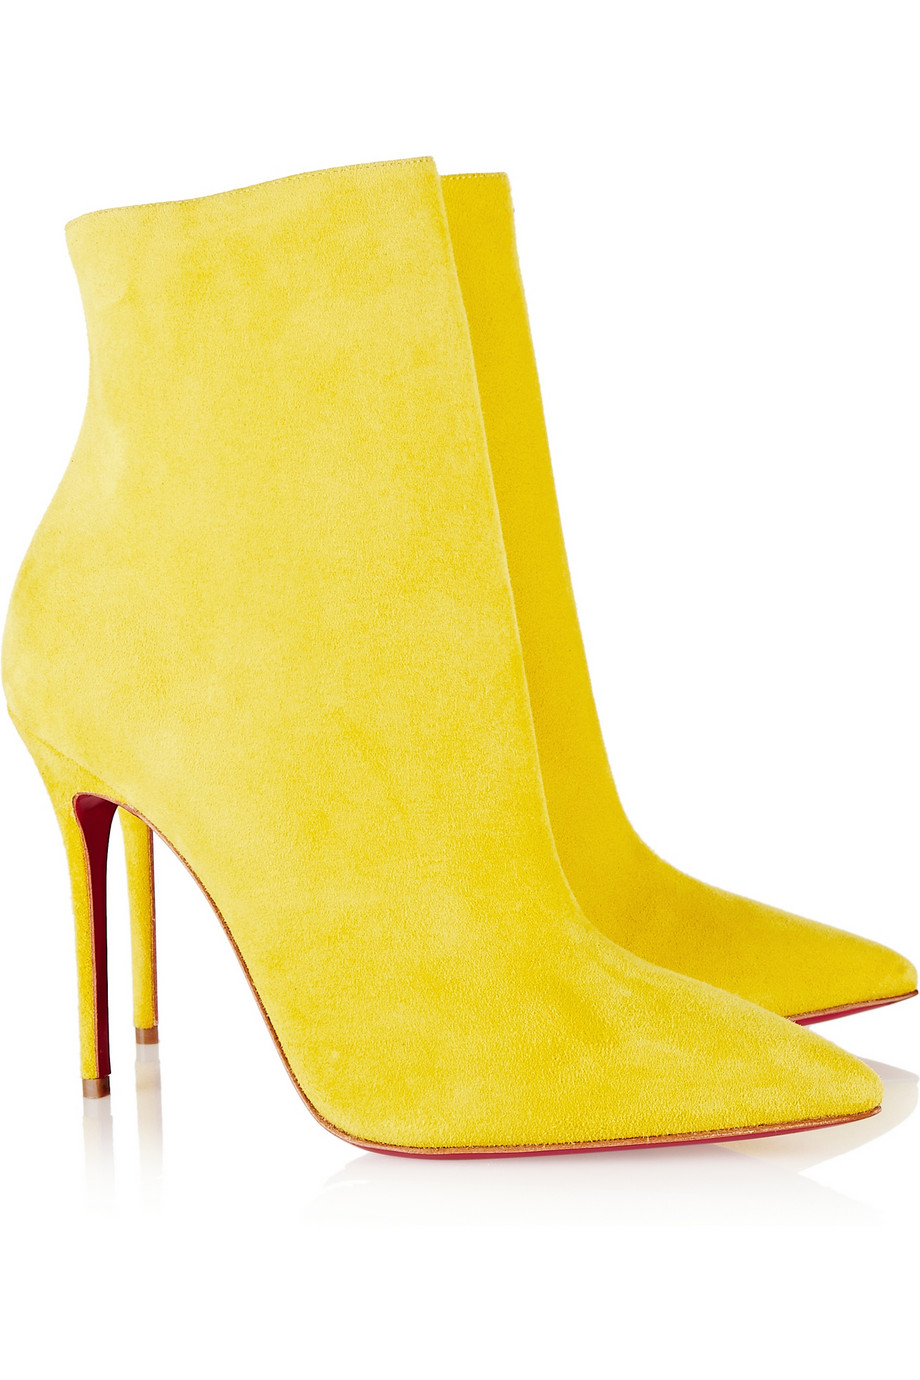 Lyst - Christian Louboutin So Kate 100 Suede Ankle Boots in Yellow